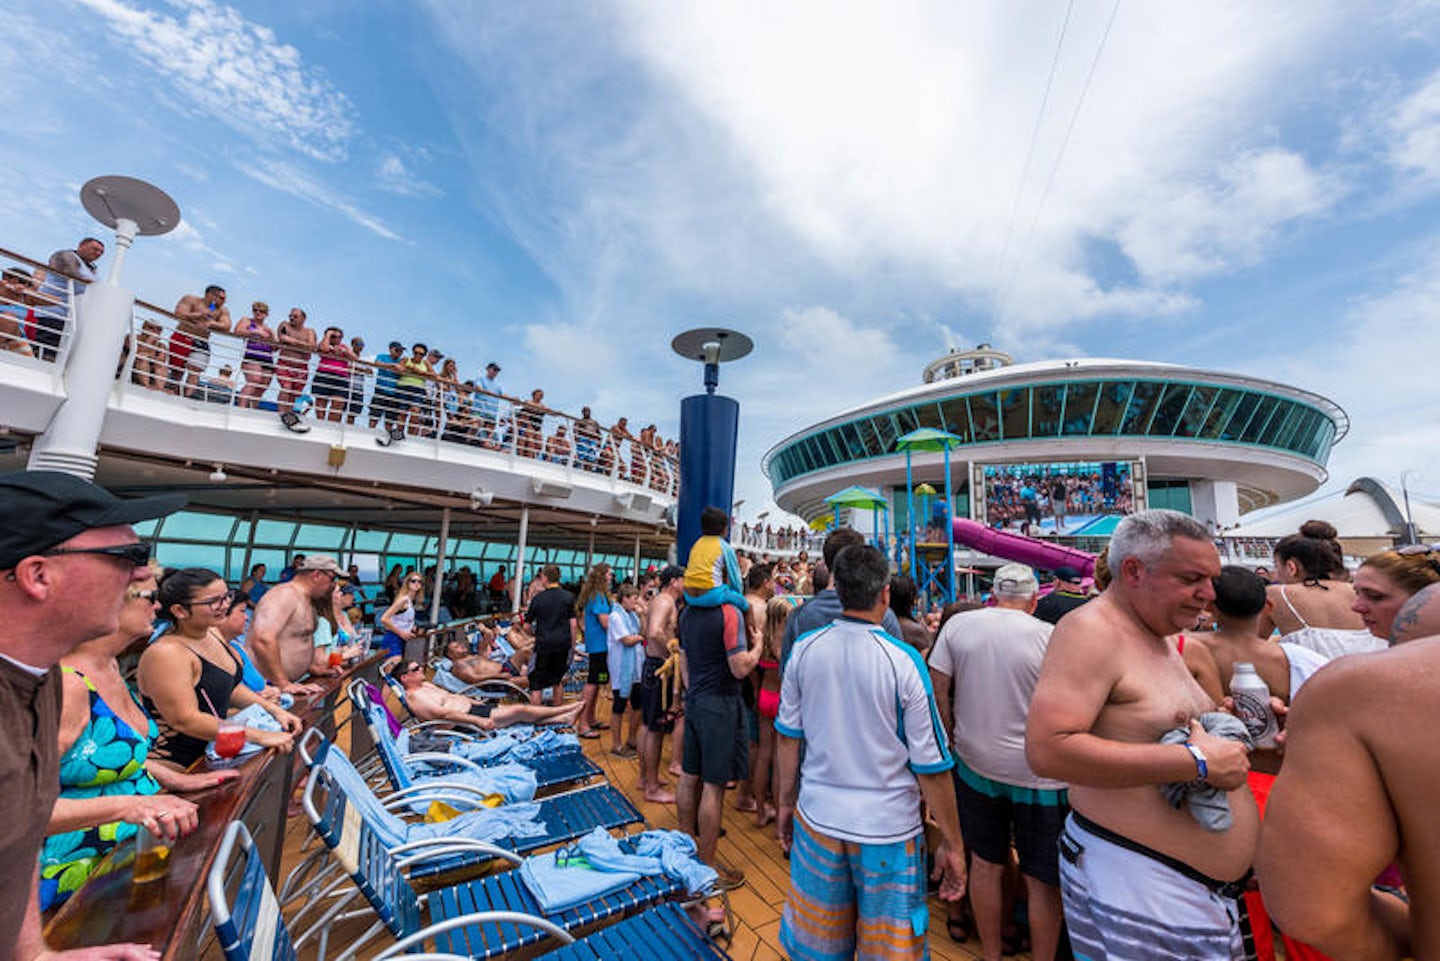 Belly Flop Contest on Adventure of the Seas